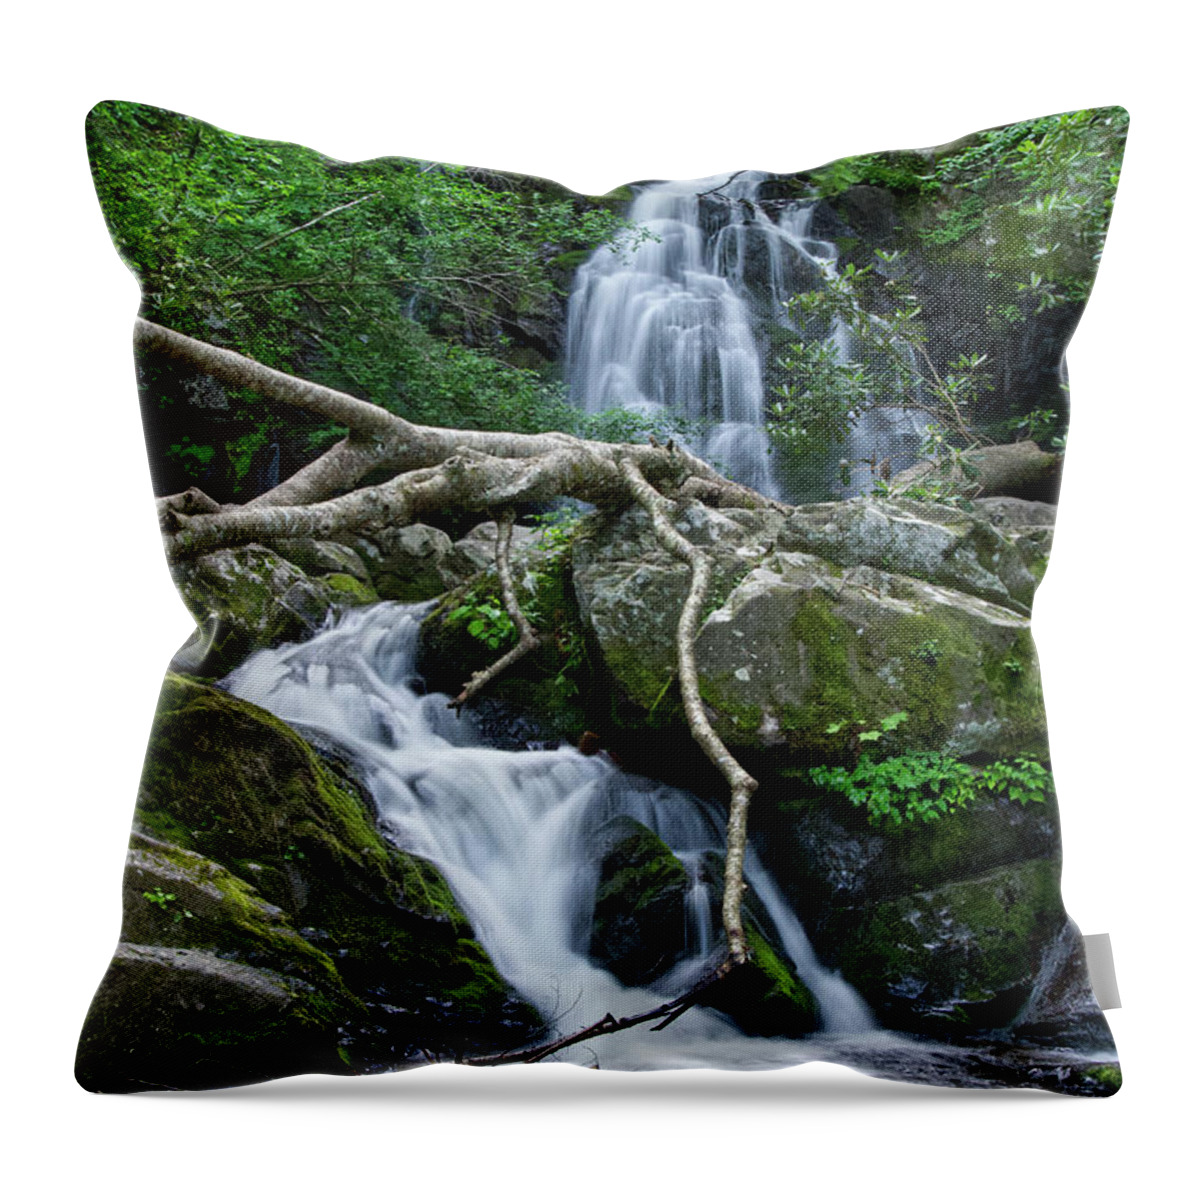 Spruce Flats Falls Throw Pillow featuring the photograph Spruce Flats Falls 20 by Phil Perkins